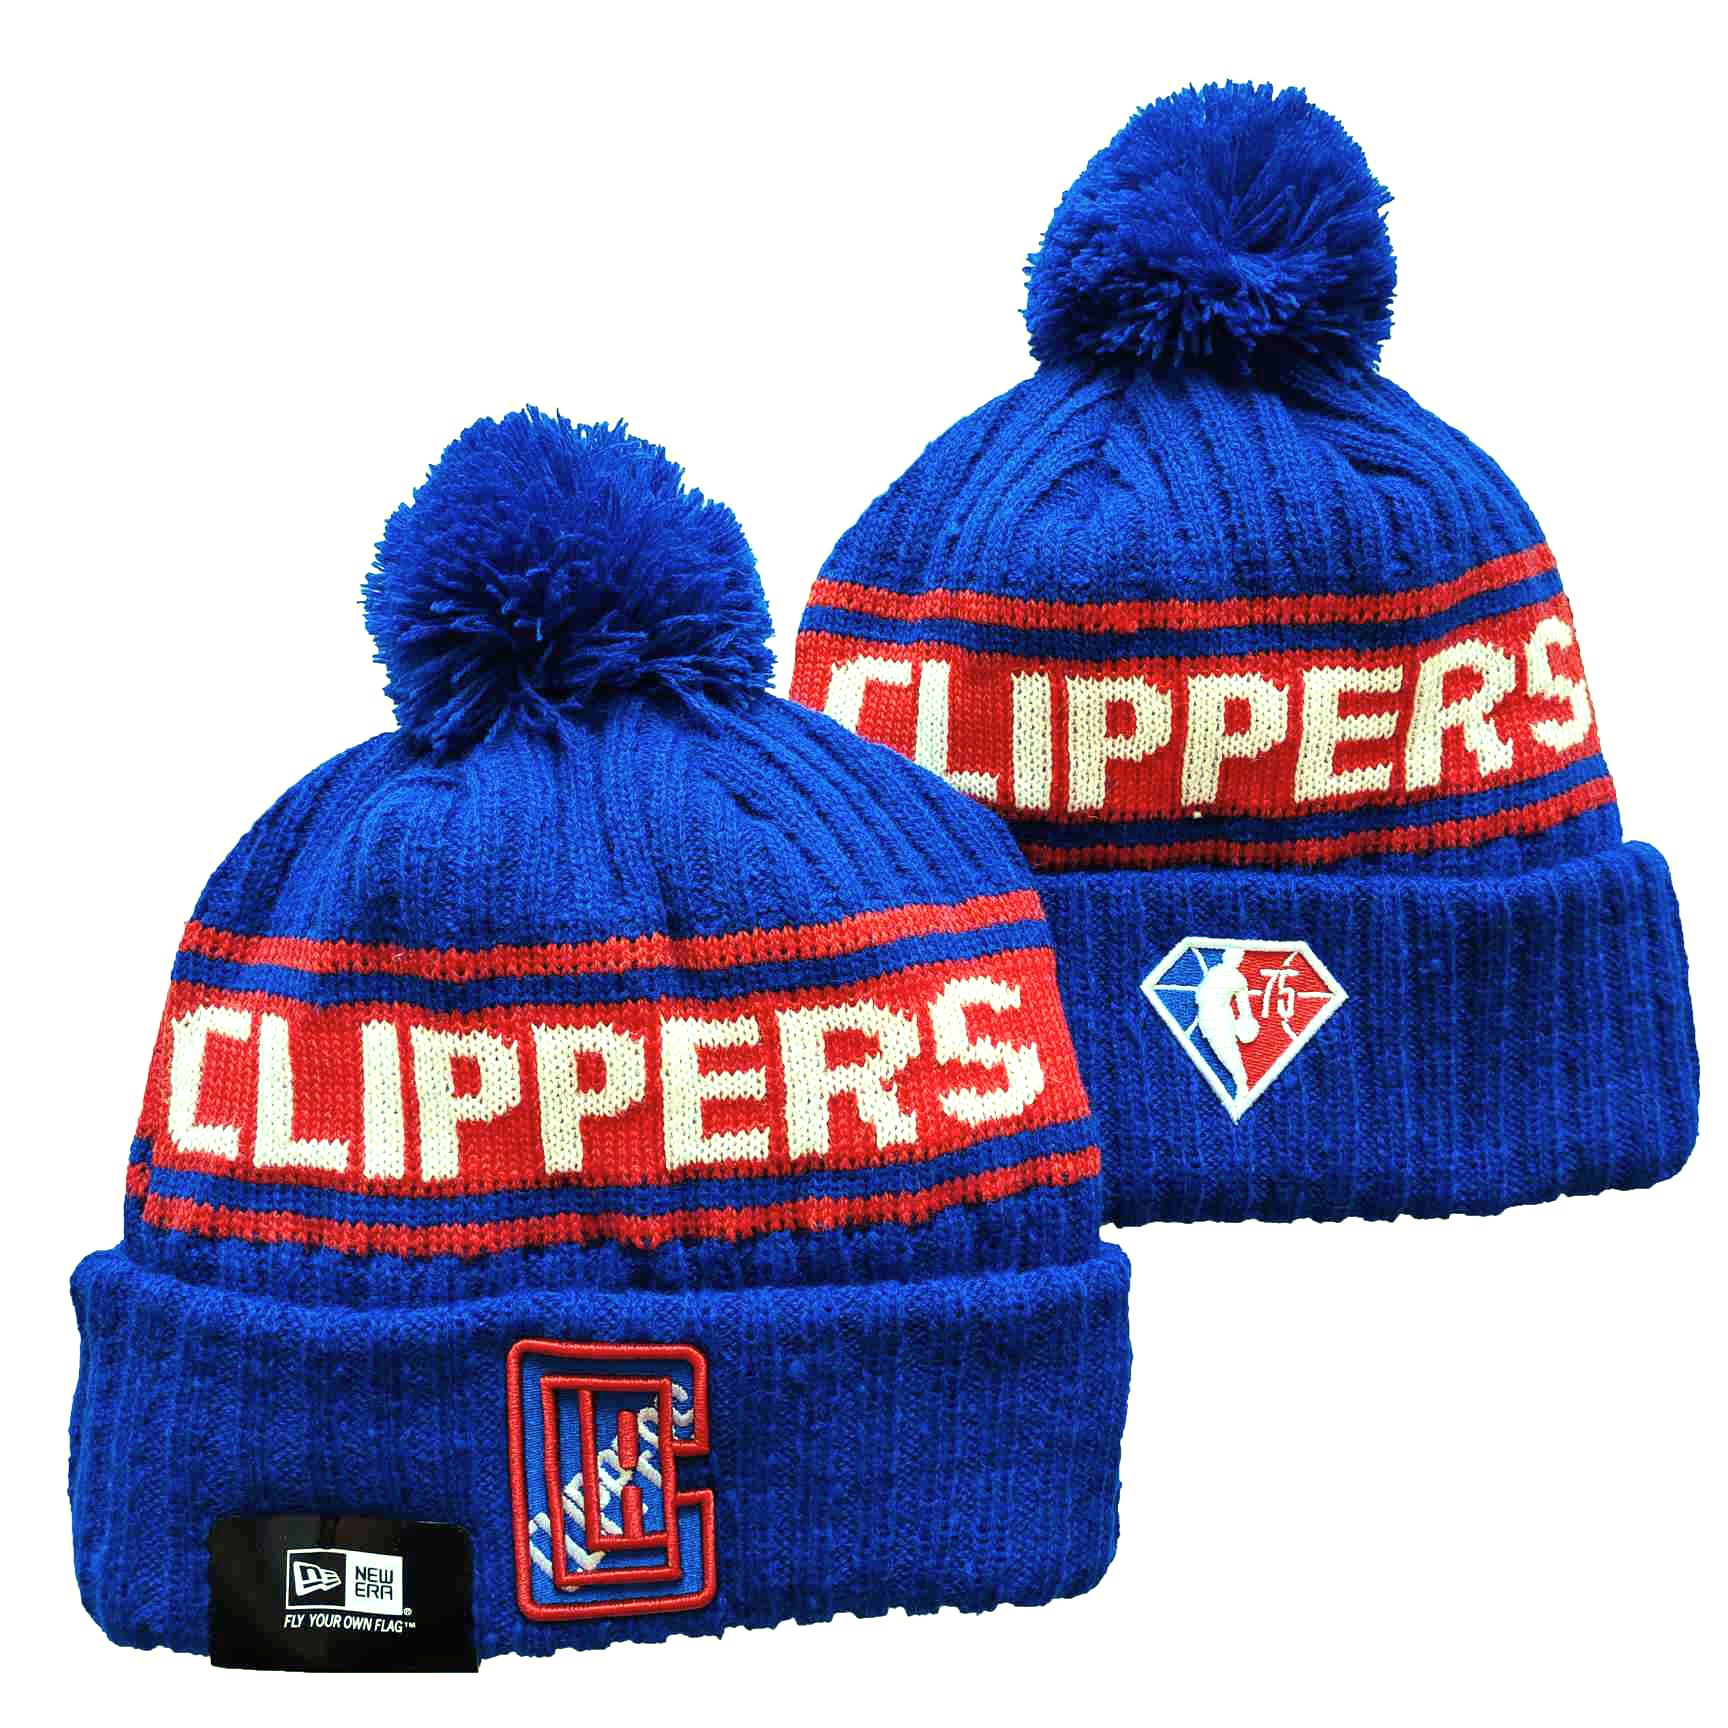 NBA Los Angeles Clippers Beanies Knit Hats-YD508